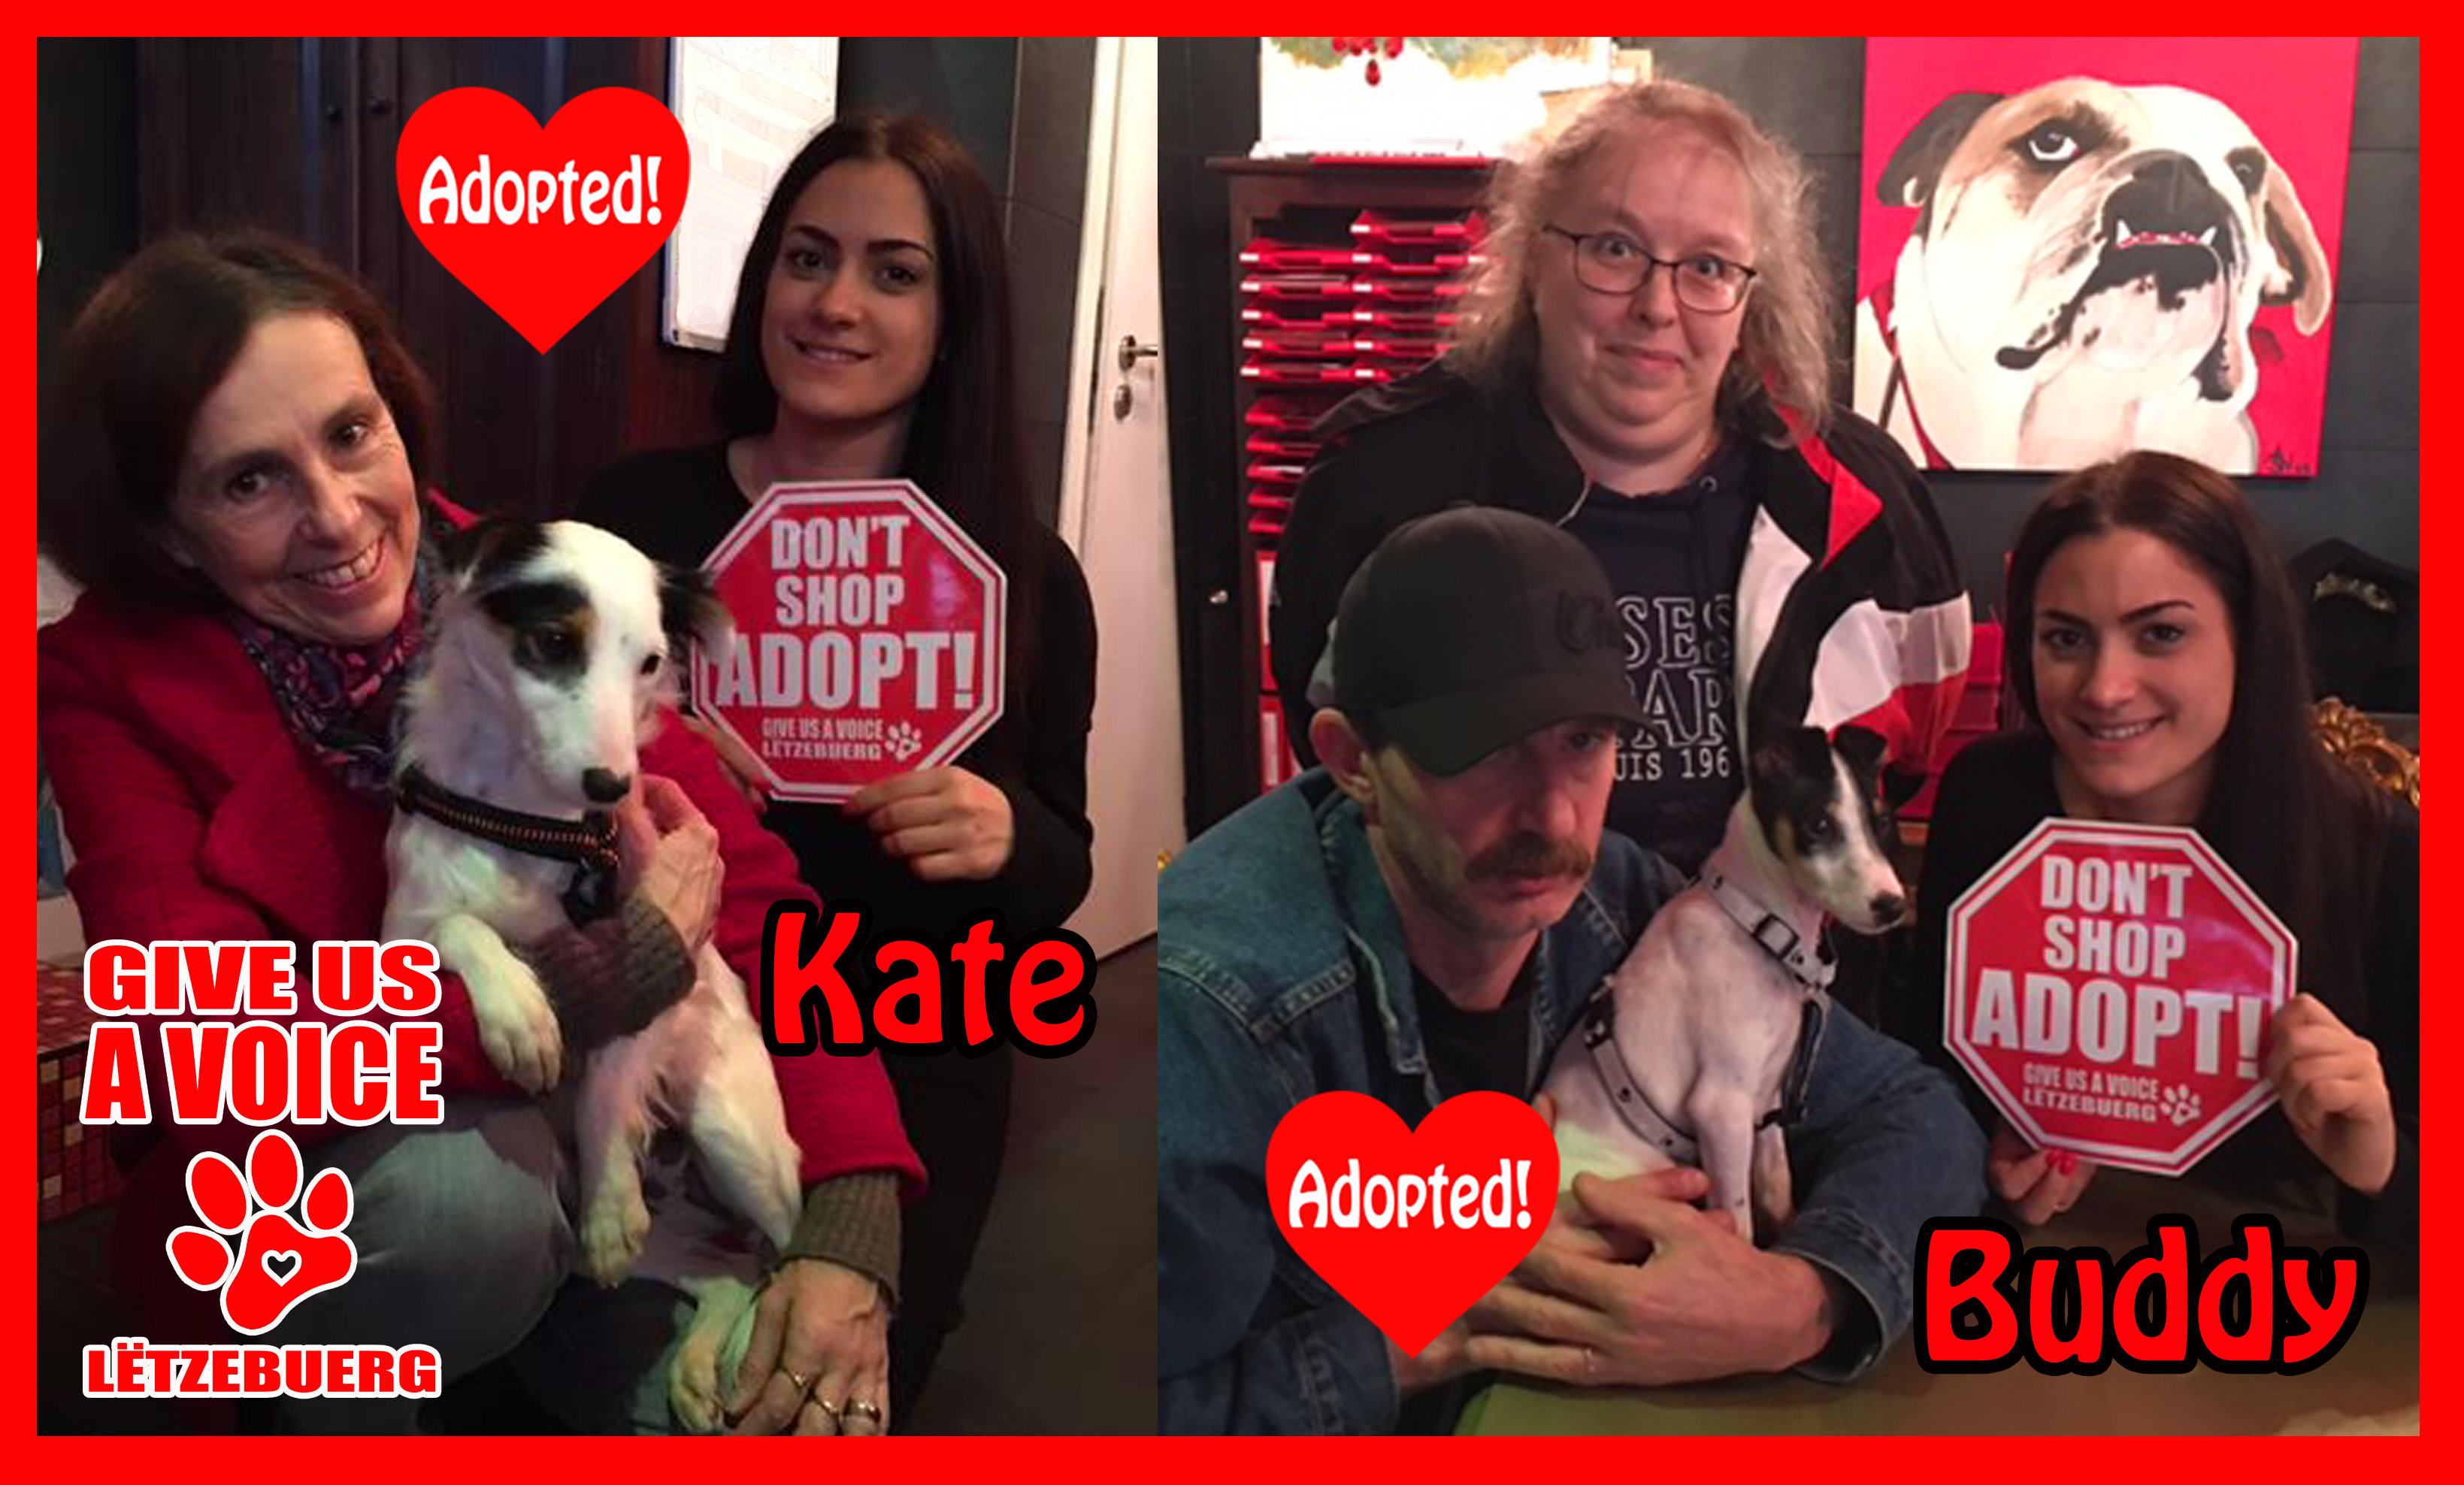 Buddy and Kate Adopted! copy